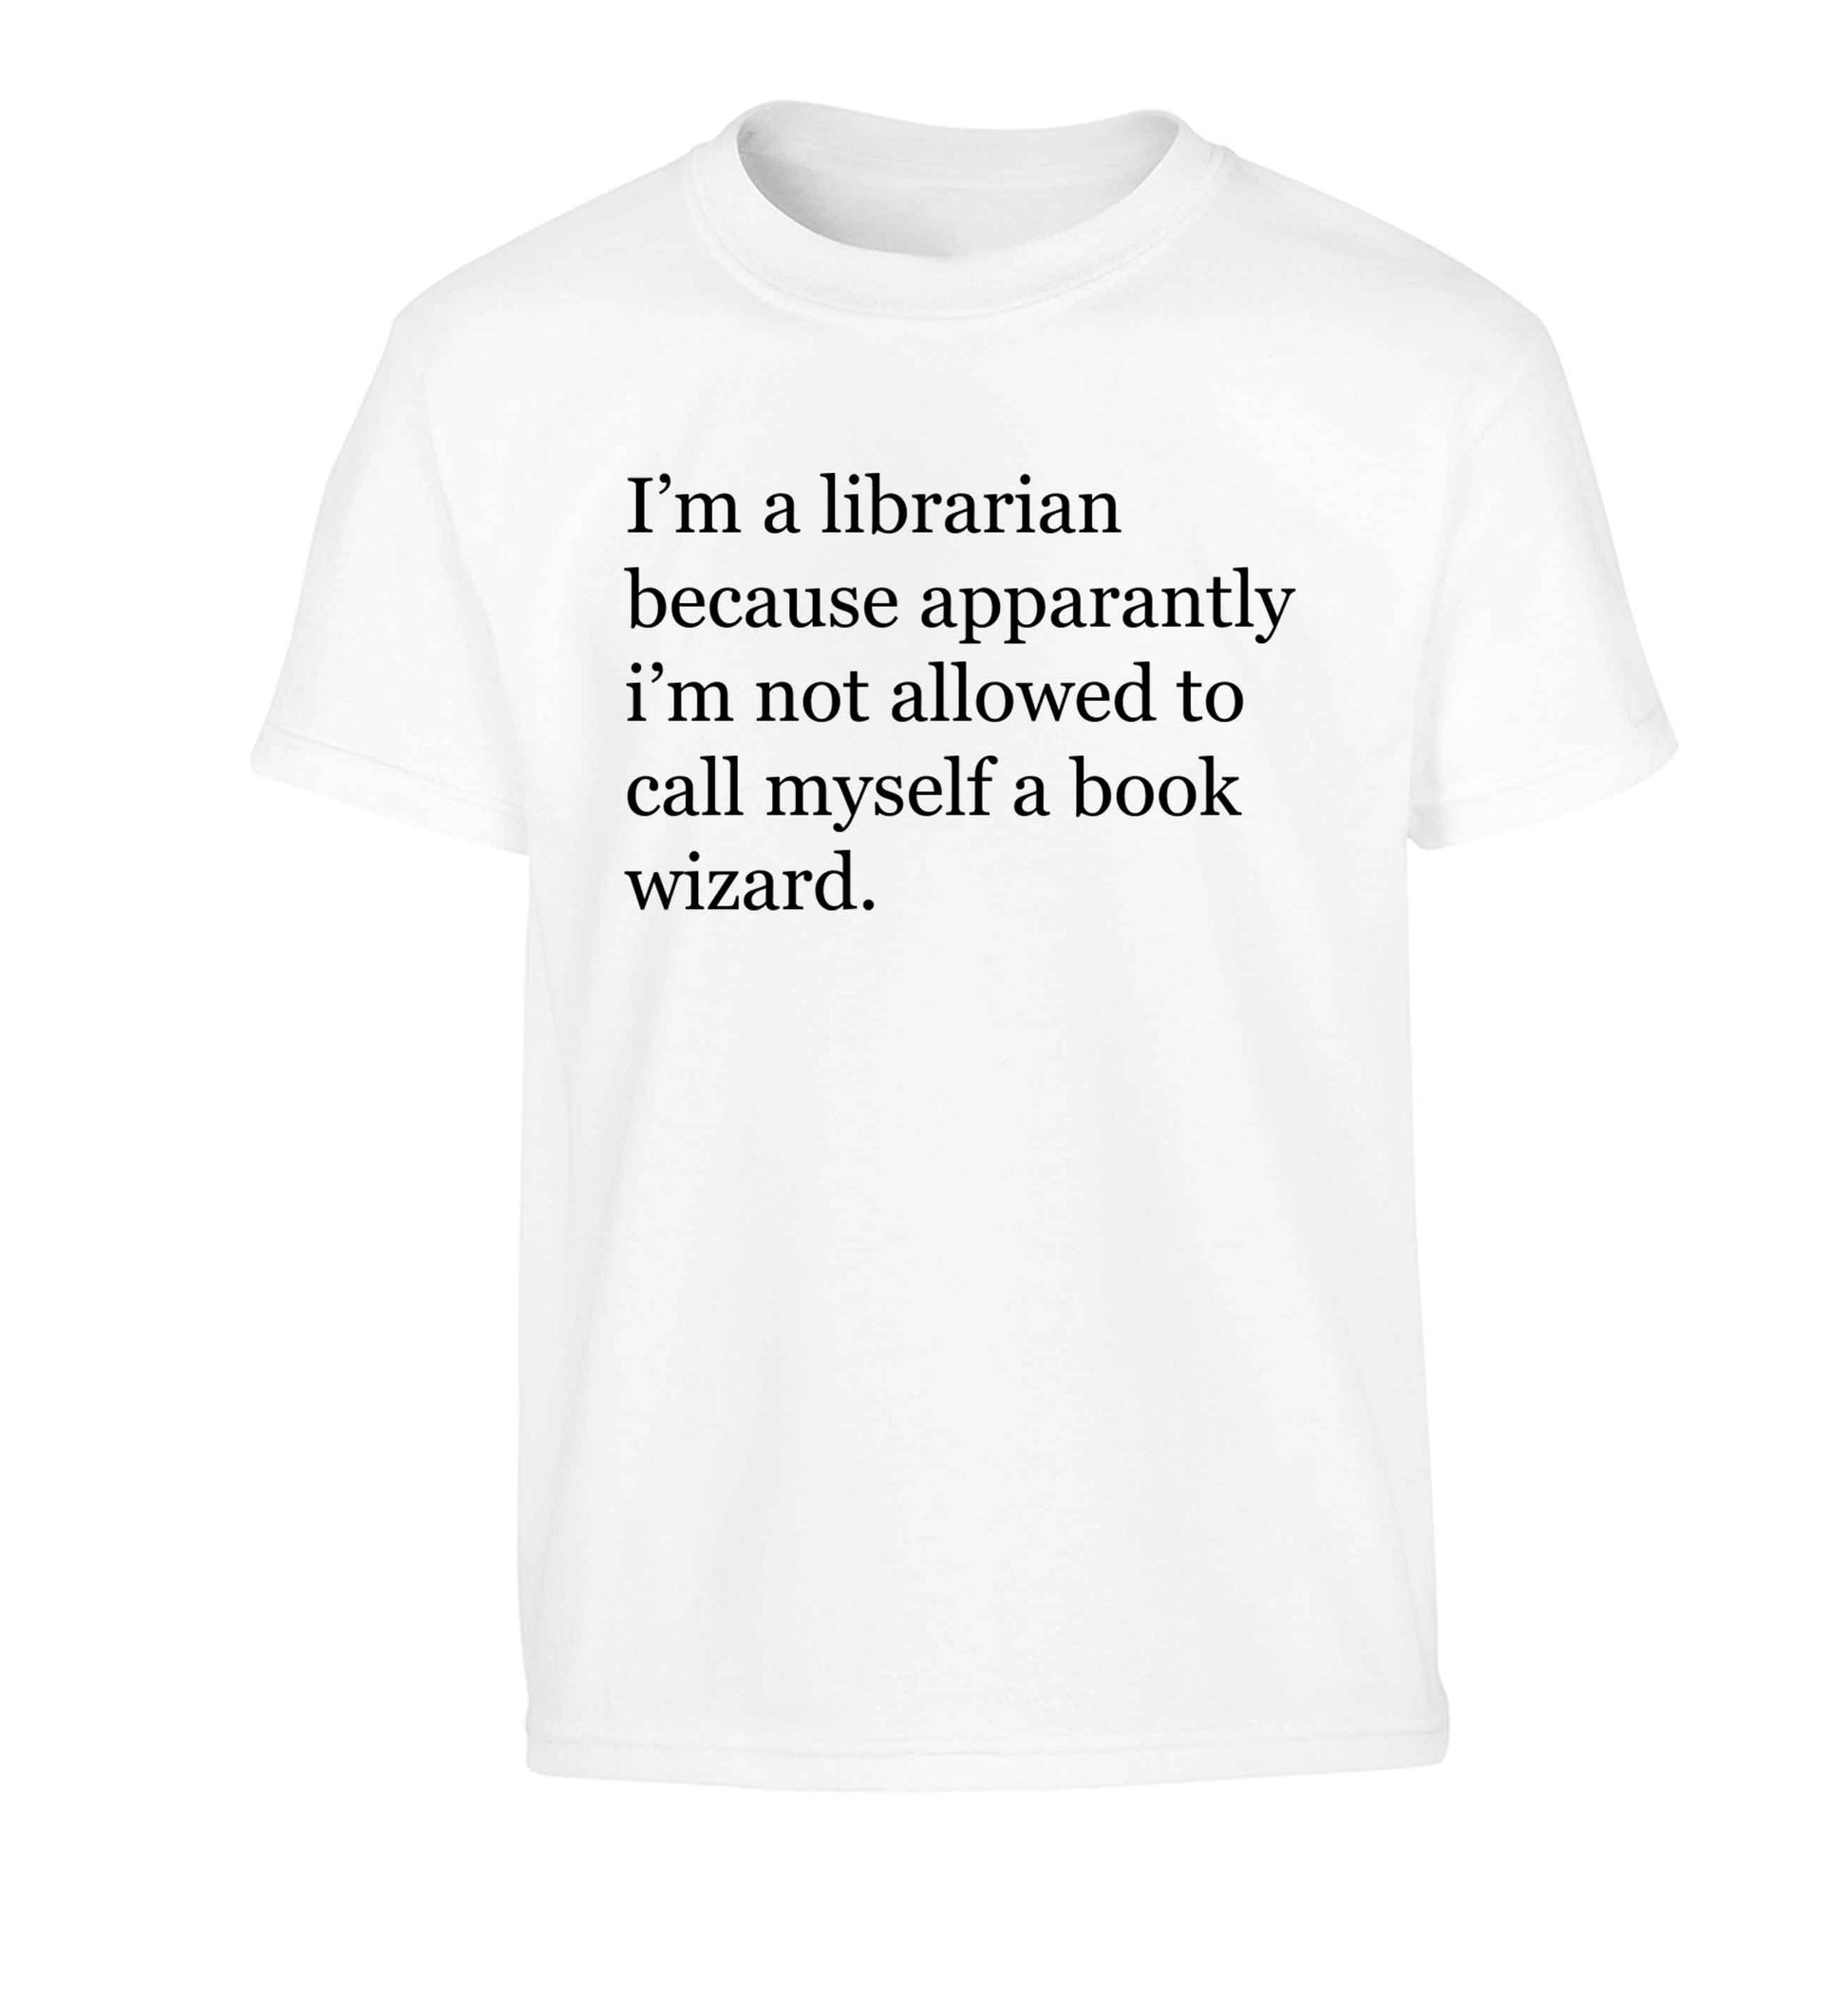 iÕm a librarian because apparantly iÕm not allowed to call myself a book wizard Children's white Tshirt 12-13 Years